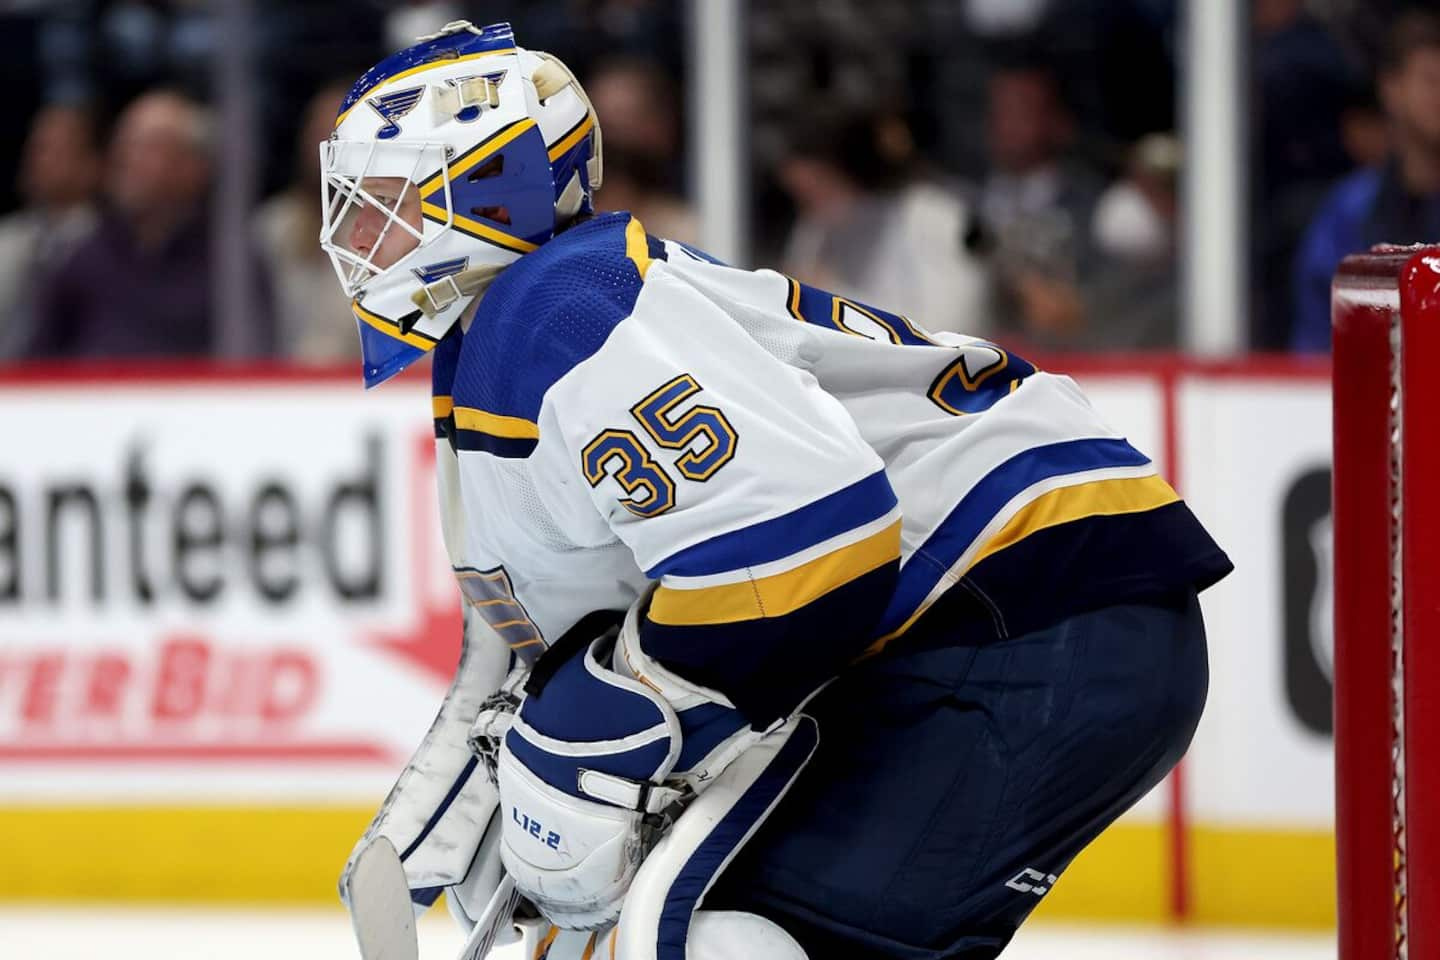 Ville Husso moves to the Wings